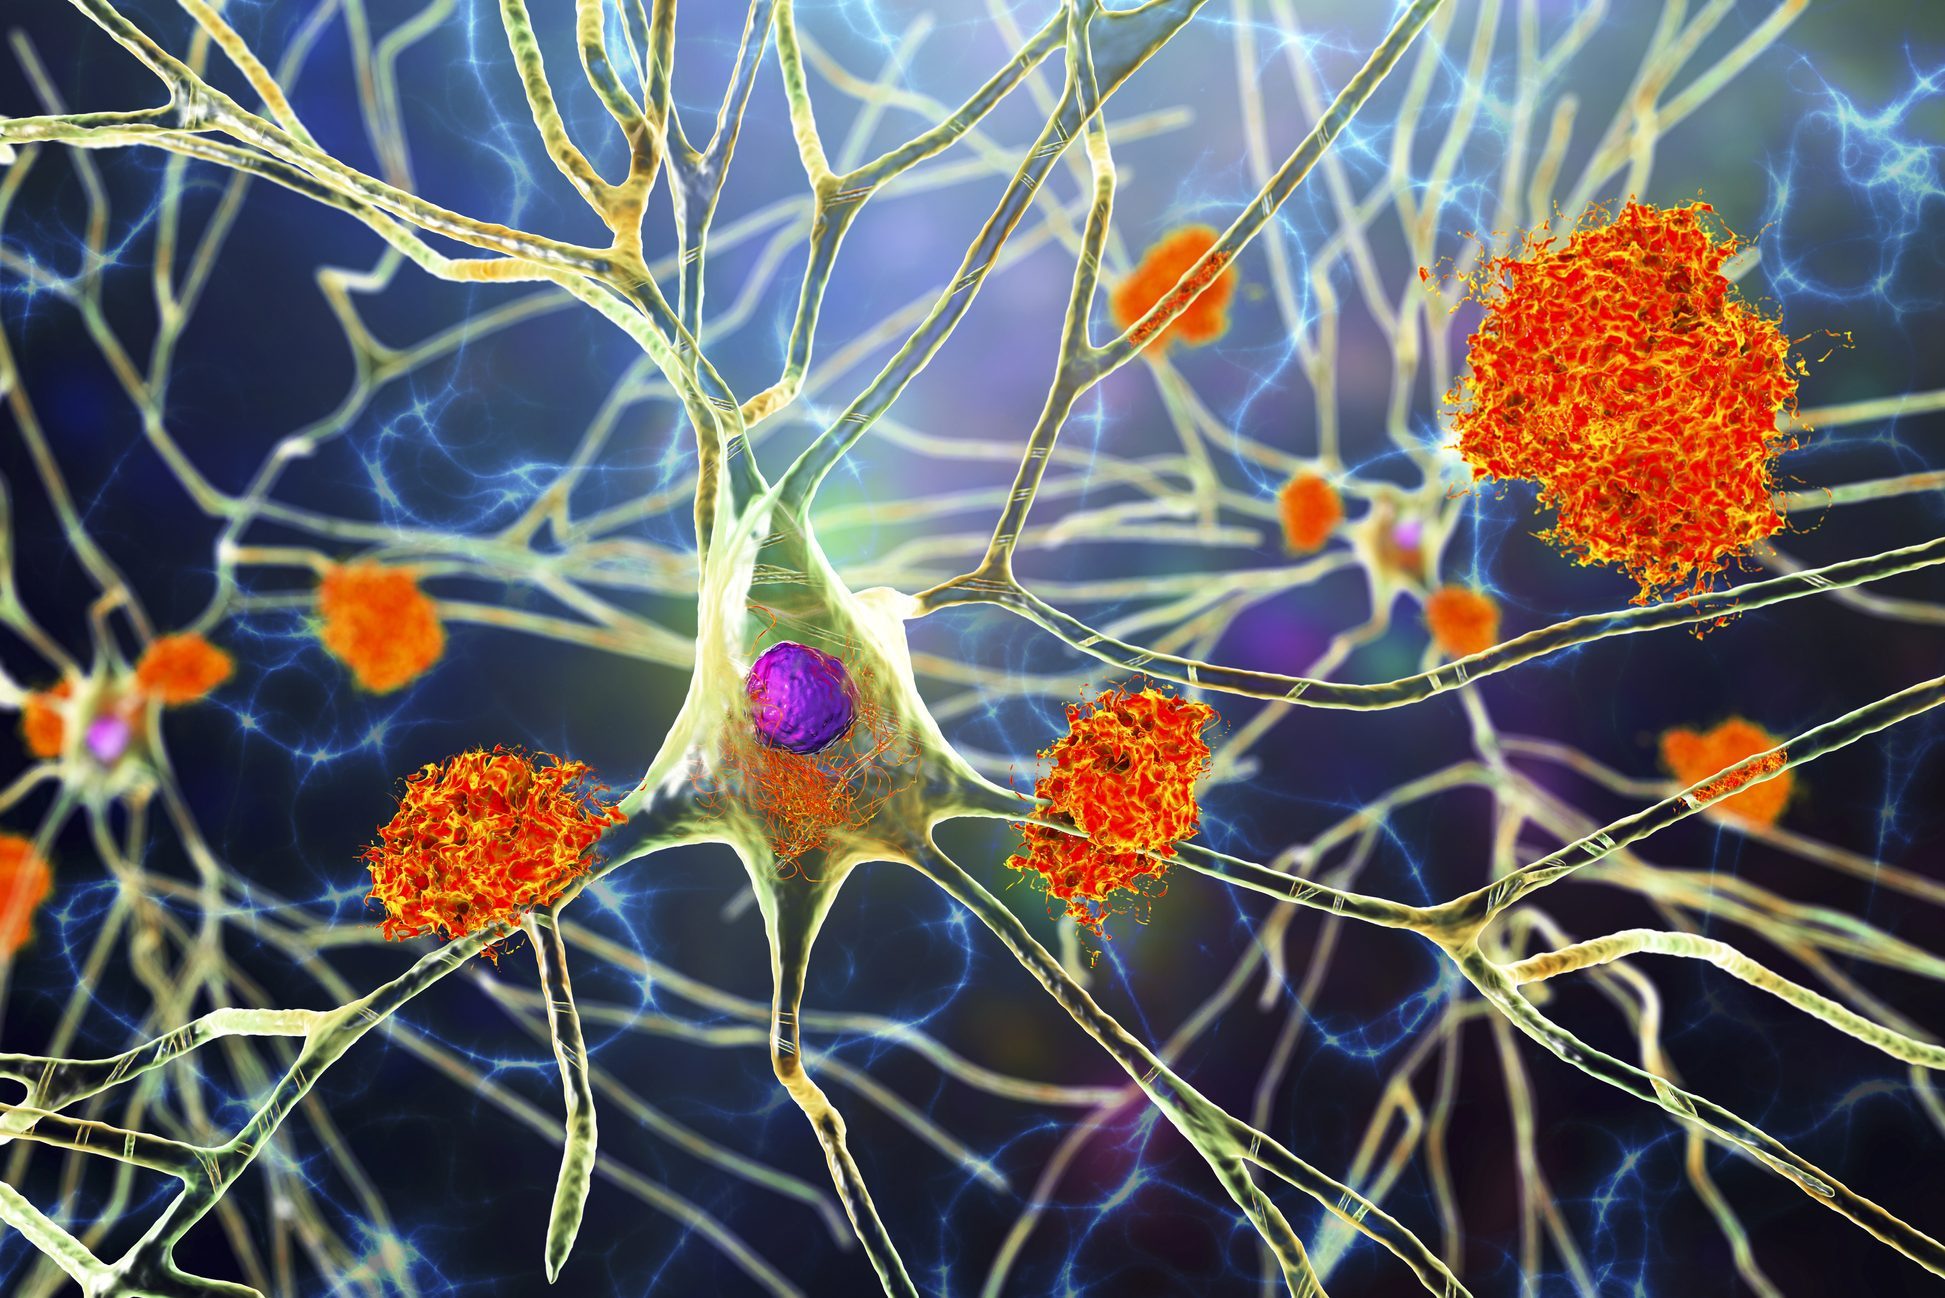 4 New Breakthroughs in Alzheimer's Research with Unprecedented Results, according to Doctors